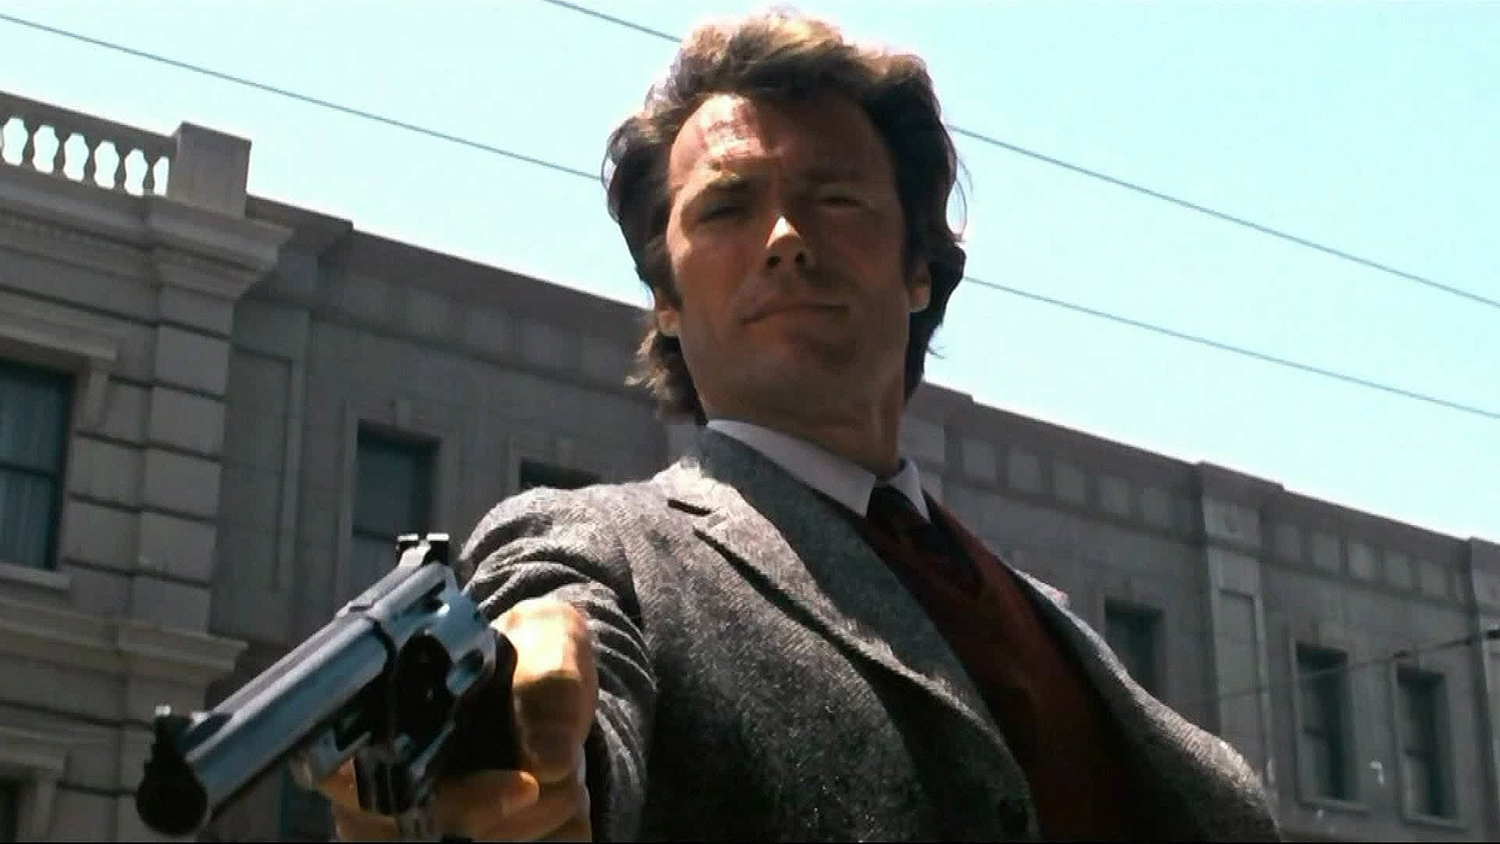 The scene from Dirty Harry where Clint Eastwood is looking down at a punk and asks if he feels lucky can get your blood pumping, but do you know what the actual line is? Most would say, “Do you feel lucky, punk?” The real line is, “You’ve got to ask yourself one question. Do I […]